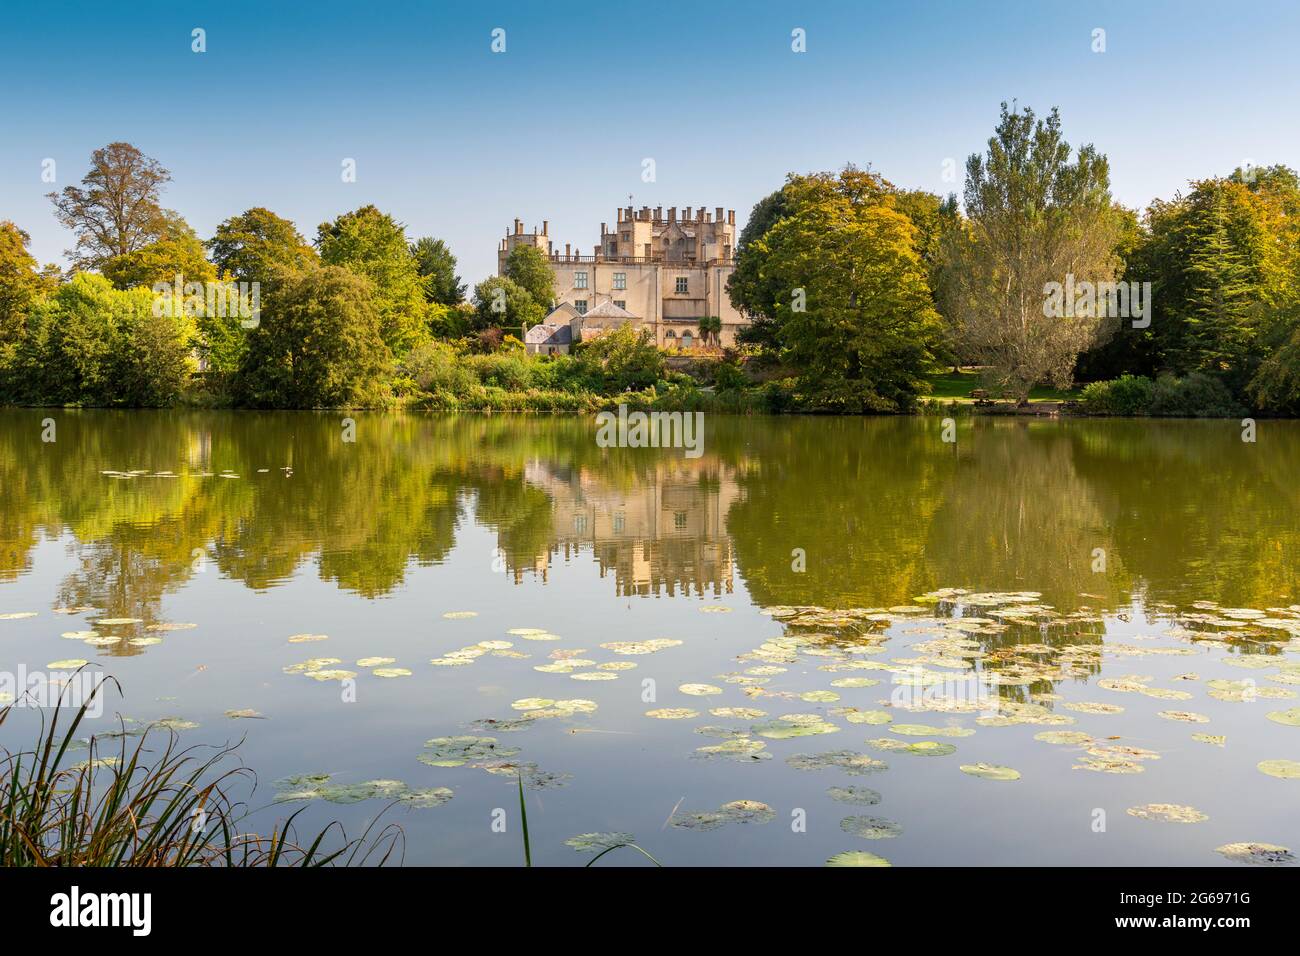 The view across the ornamental lake created by Capability Brown towards Sherborne Castle, Dorset, England, UK Stock Photo